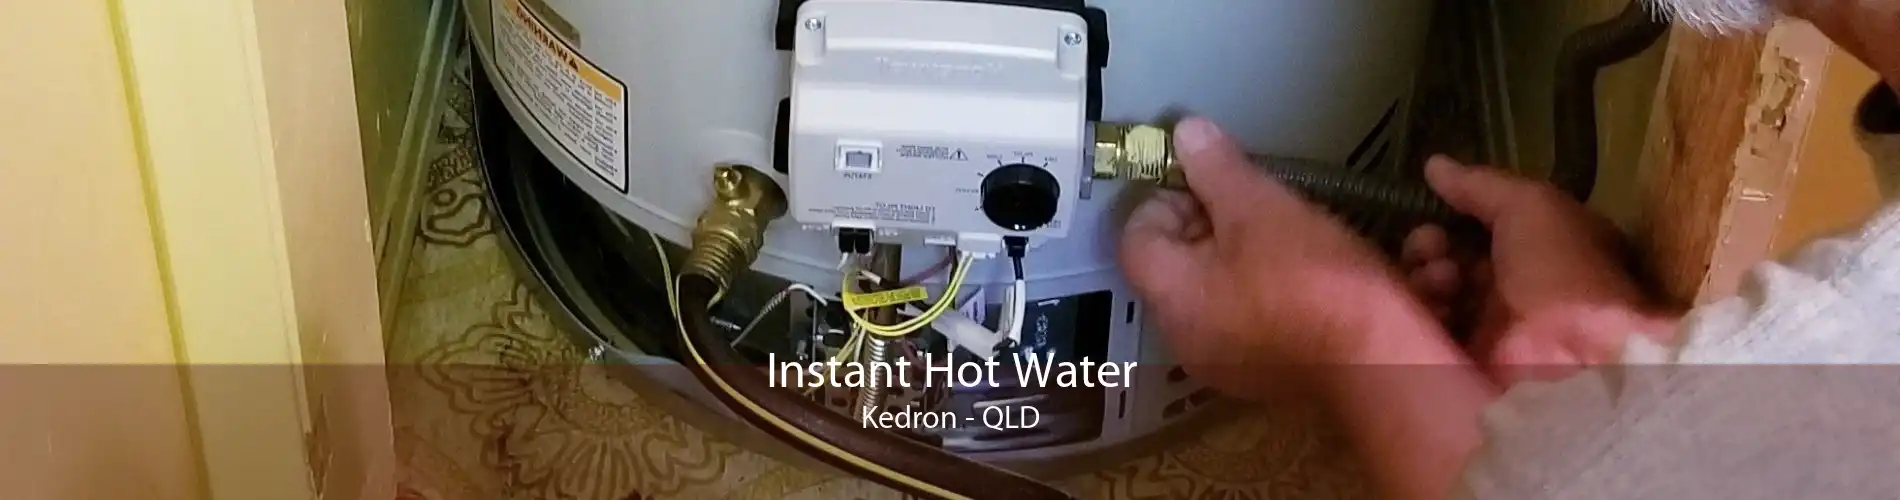 Instant Hot Water Kedron - QLD